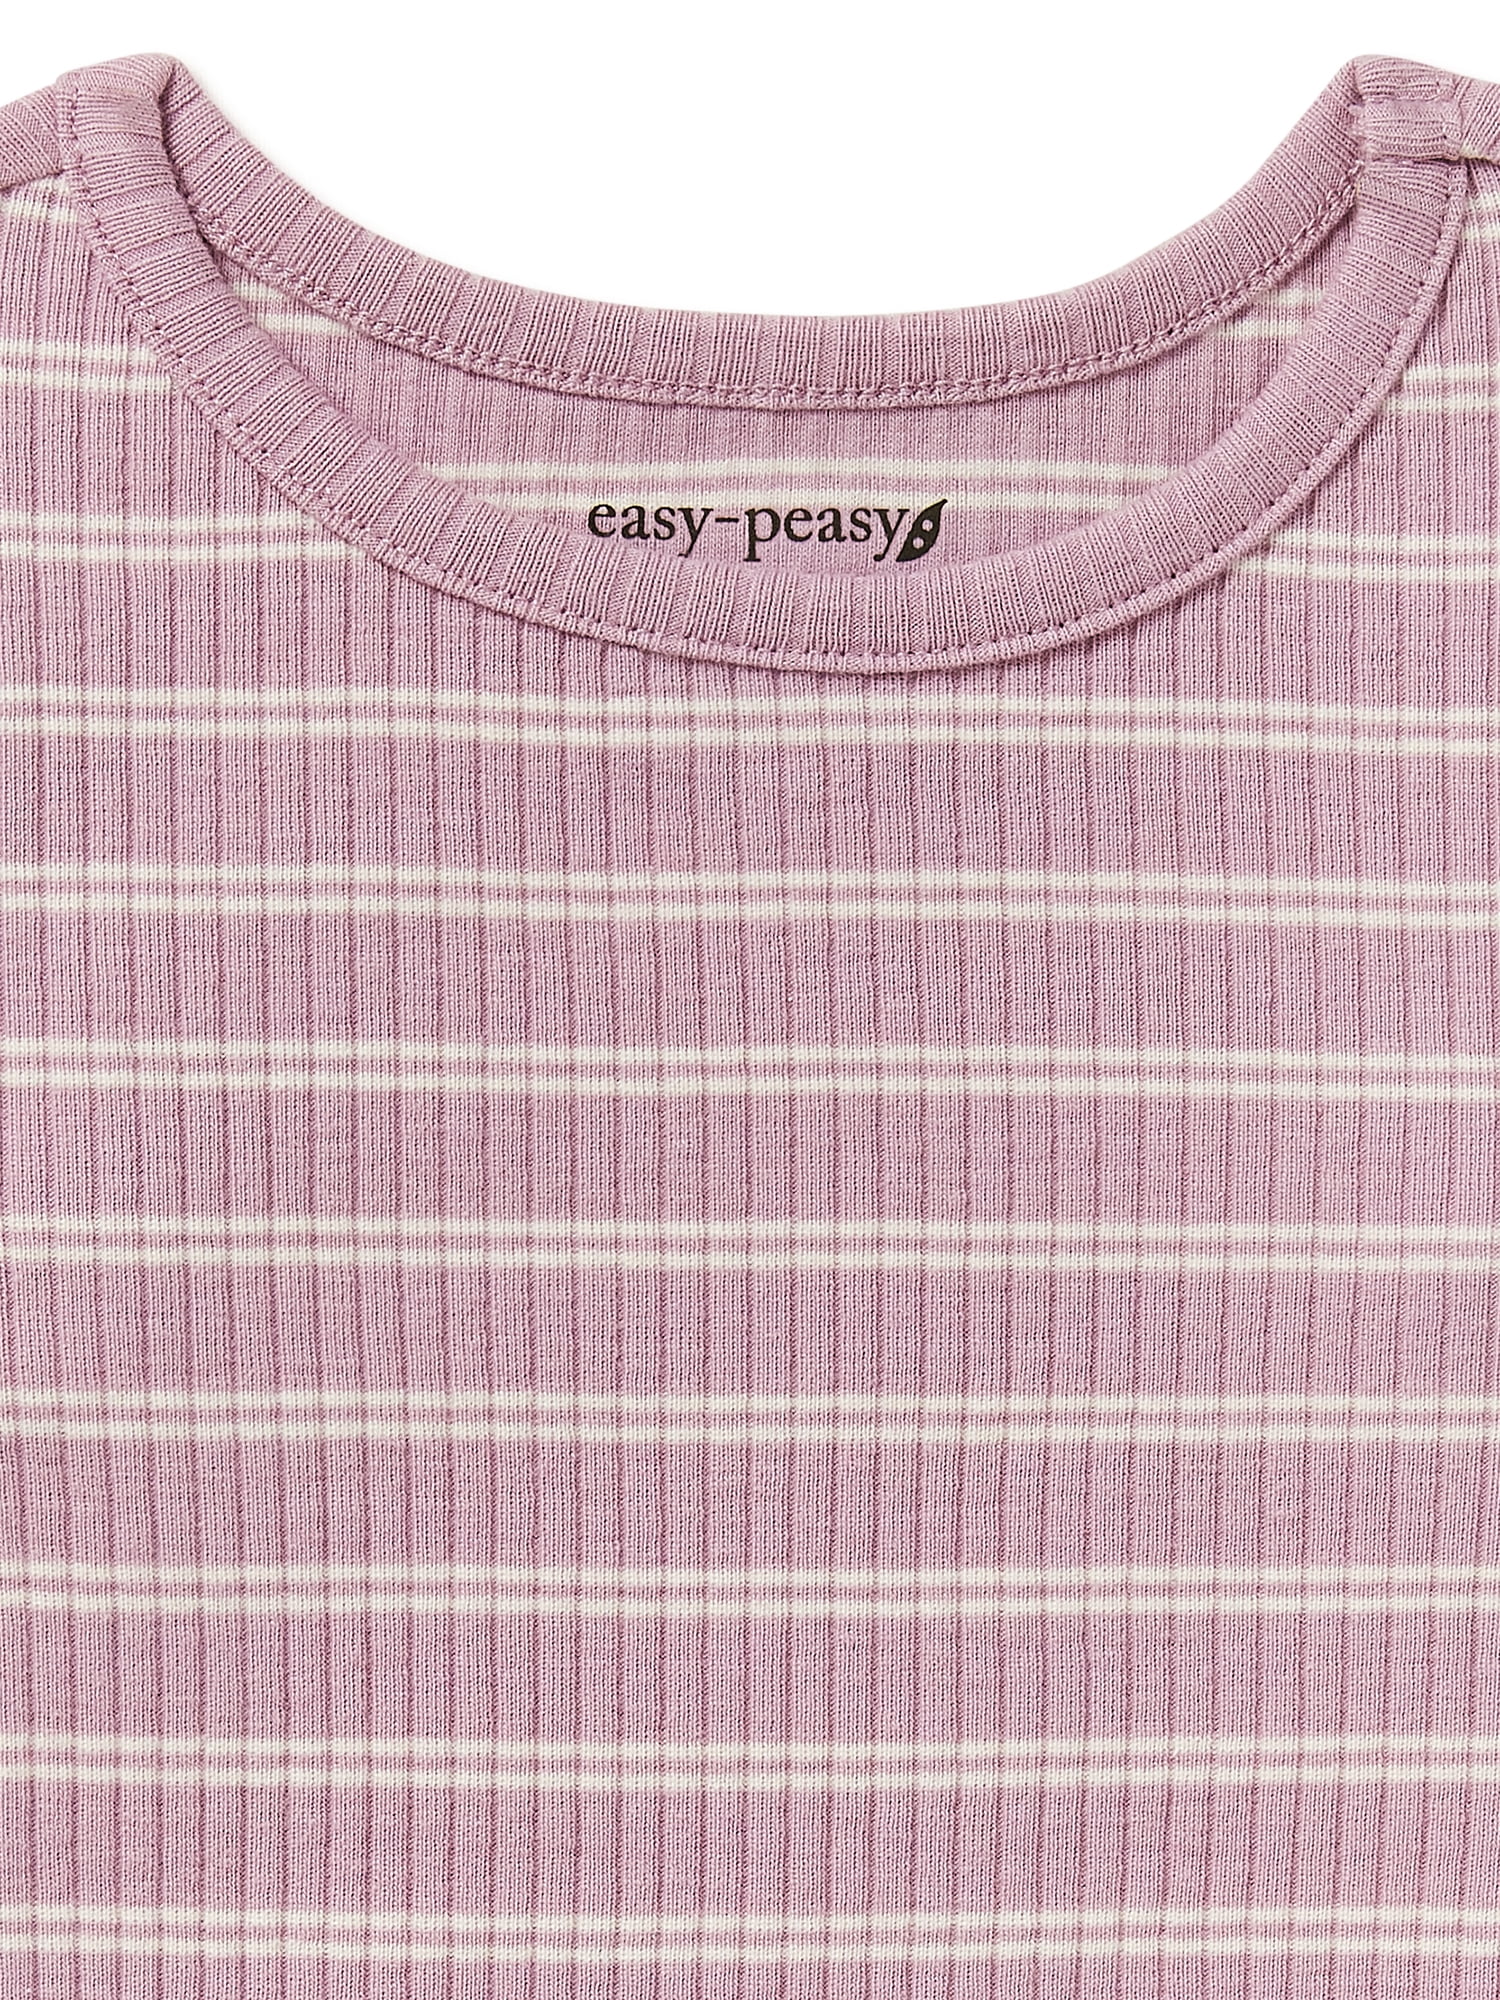 easy-peasy Baby Sizes Edge Lettuce 12 Long Top, Months-5T and Toddler Sleeve Girls